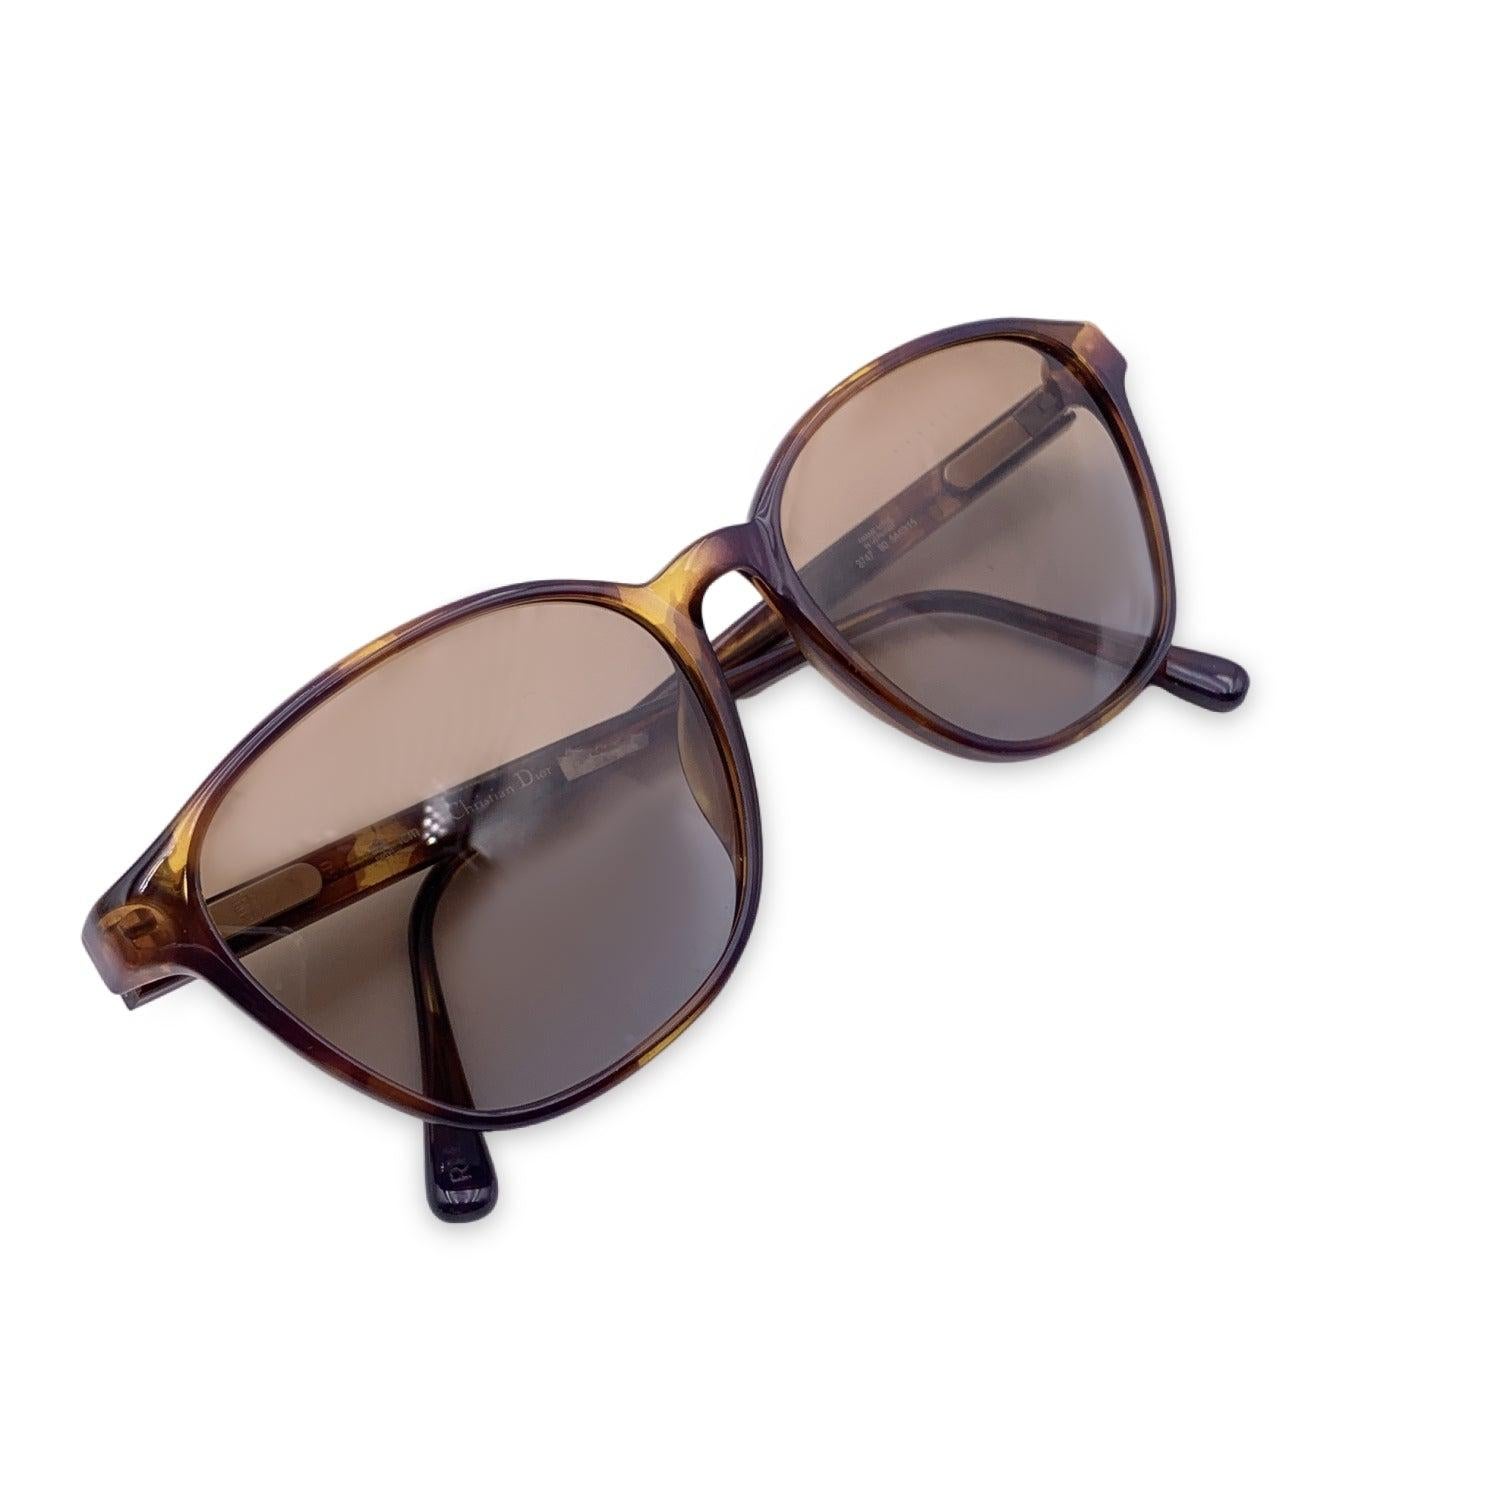 Vintage Christian Dior Women Sunglasses, Mod. 2747 80 Optyl. Size: 54/15 140mm. Brown acetate frame, with CD logo con temples . 100% Total UVA/UVB protection brown gradient lenses. Details MATERIAL: Plastic COLOR: Brown MODEL: 2747 GENDER: Women